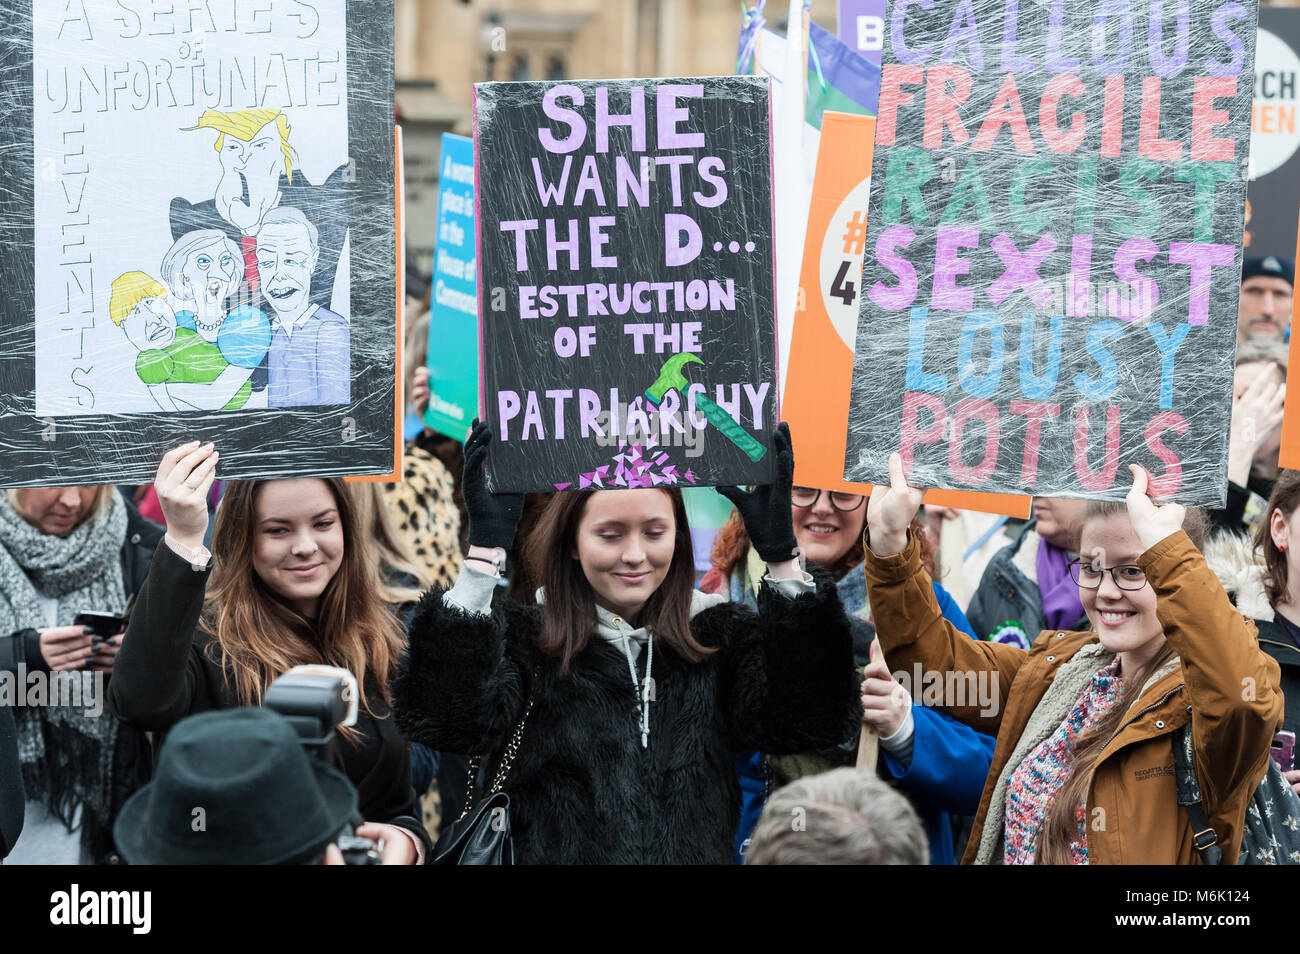 London, UK. 4th March, 2018. Thousands of people including politicians, celebrities and activists gather at Old Palace Yard outside the Houses of Parliament in London to take part in March4Women, an annual event to celebrate International Women's Day and 100 years since women in the UK first gained the right to vote. The event, organised by CARE International, aims to highlight inequality faced by women and girls around the world and campaign for gender equality and women's rights worldwide. Credit: Wiktor Szymanowicz/Alamy Live News Stock Photo